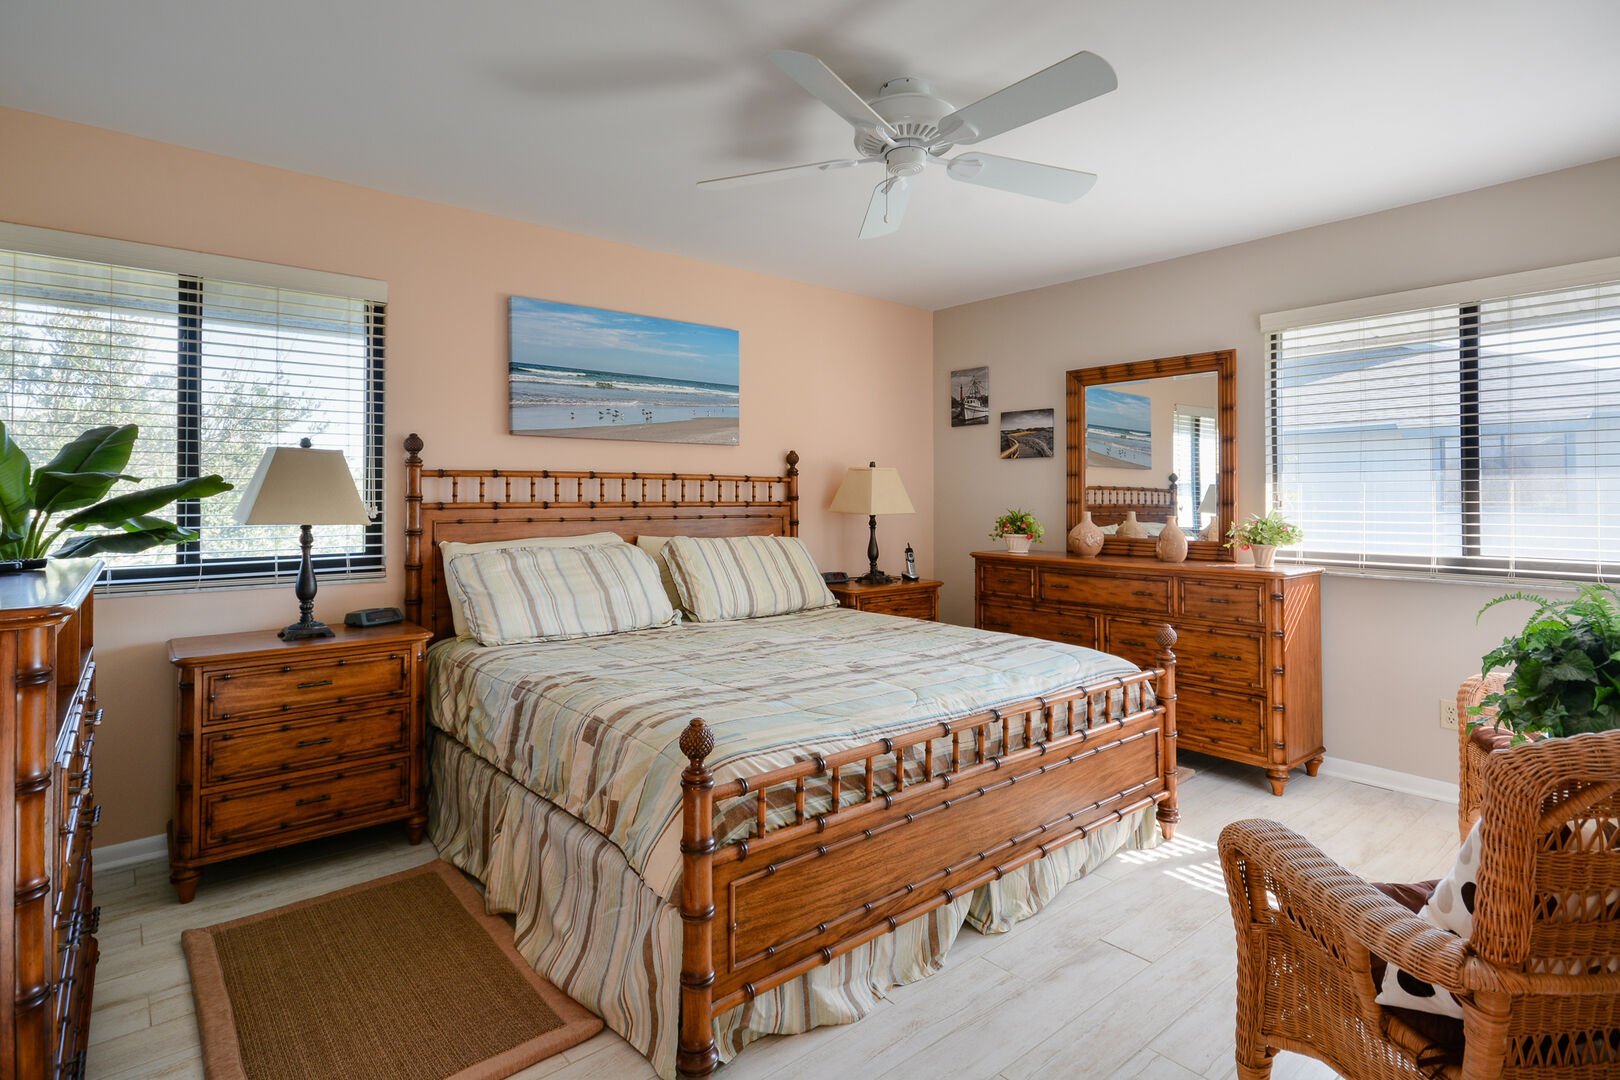 Master bedroom with king size bed, flat screen HDTV, access to the patio and private bath.